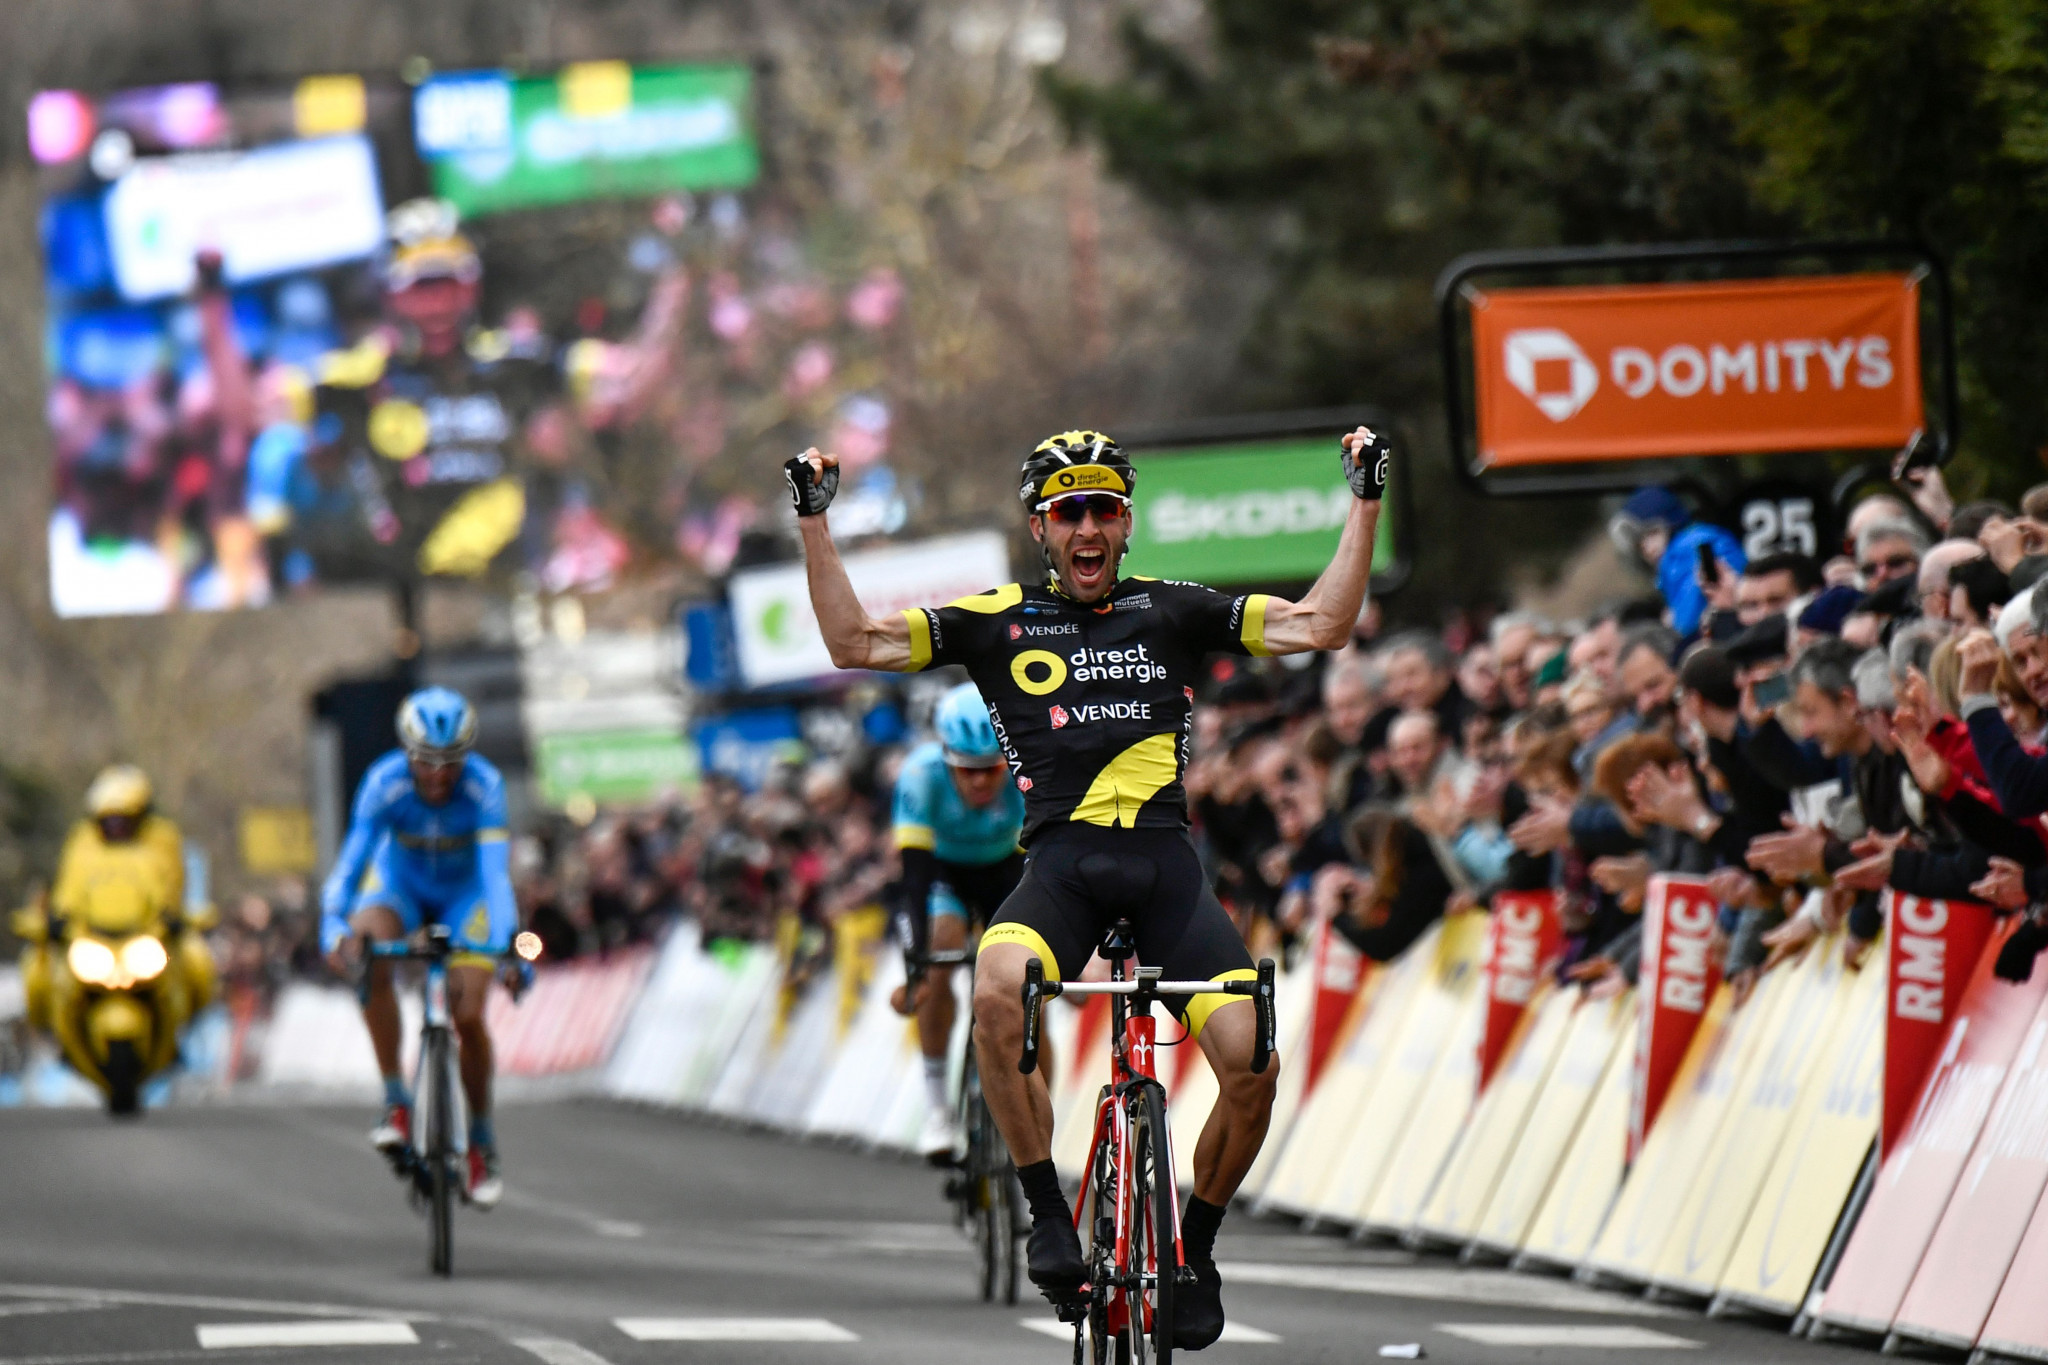 Hivert clinches win on third stage of Paris-Nice